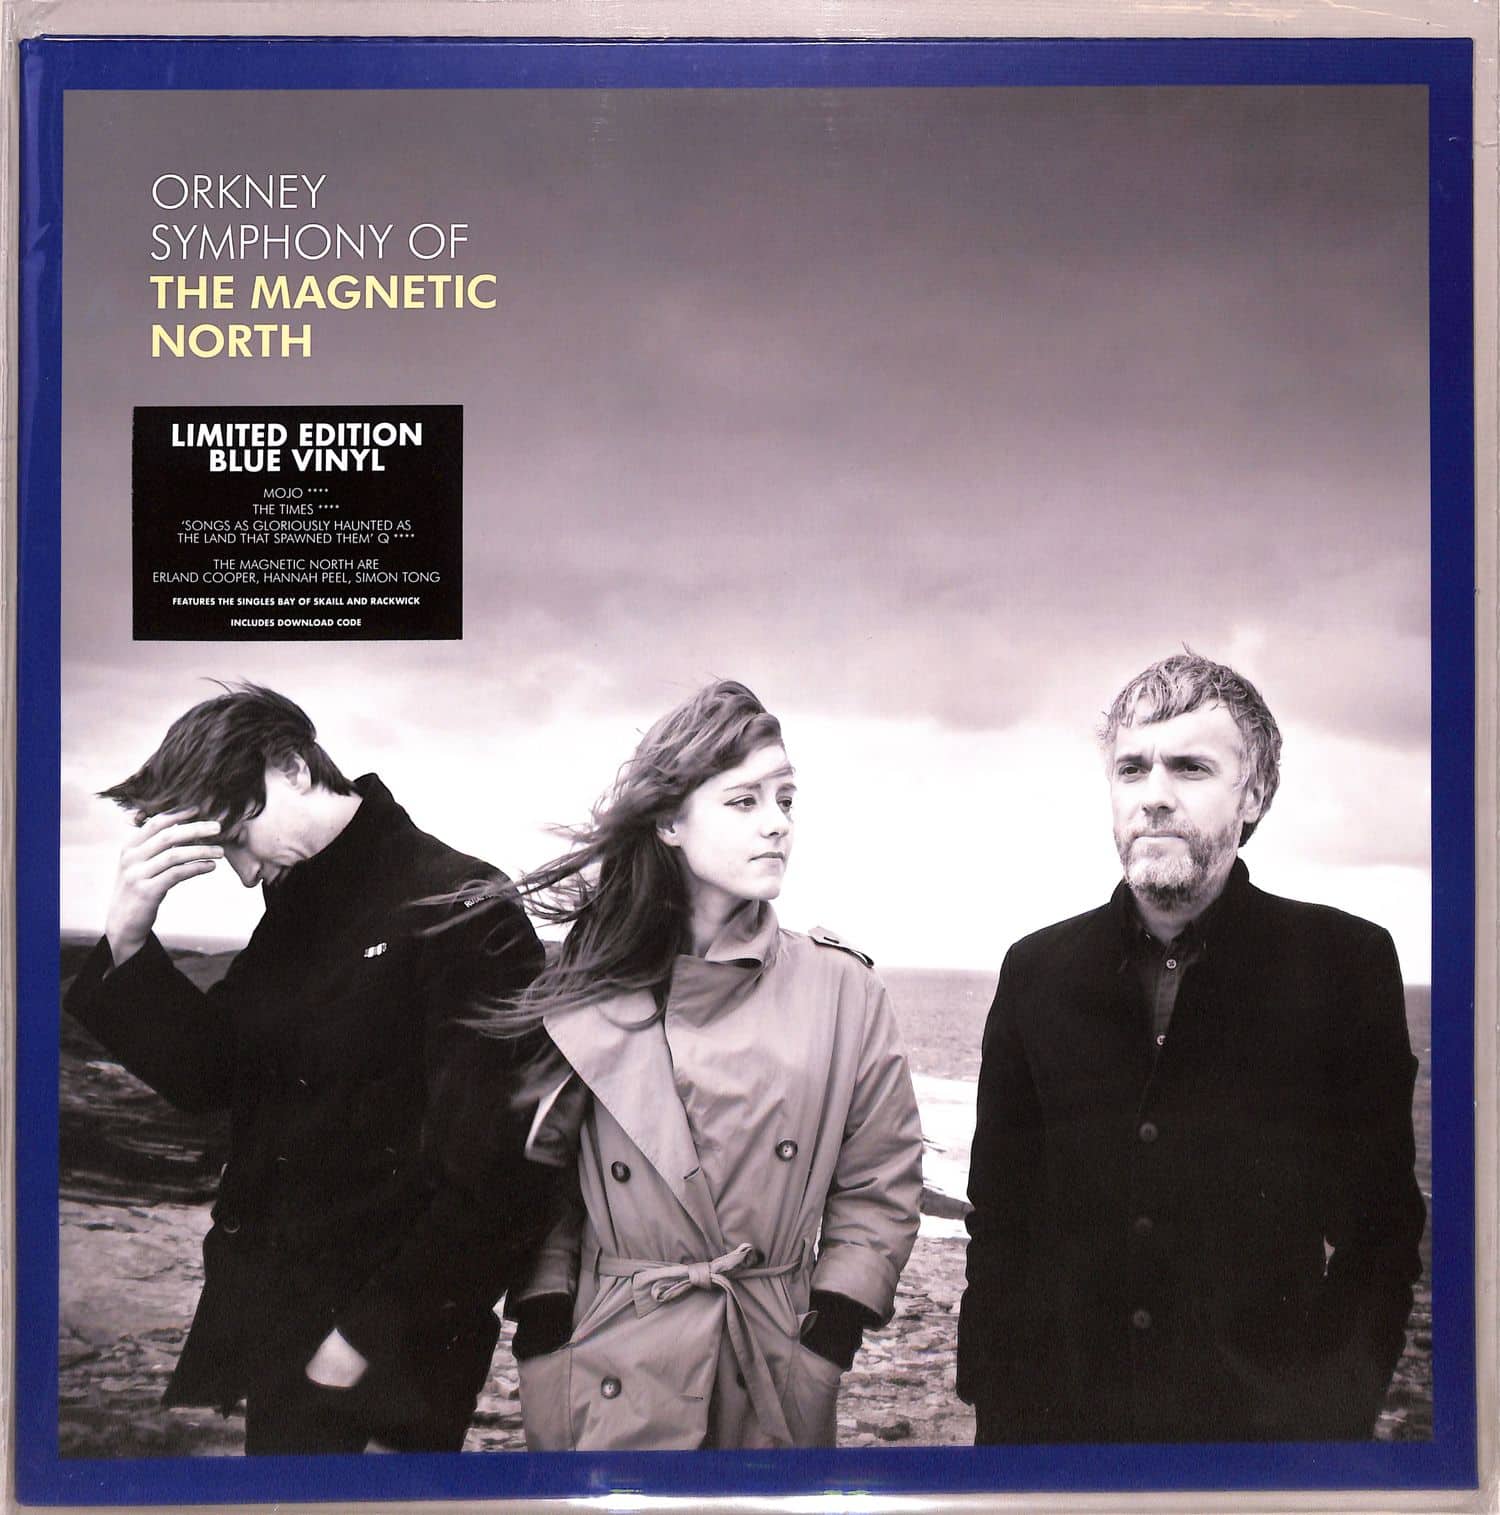 The Magnetic North - ORKNEY: SYMPHONY OF THE MAGNETIC NORTH 